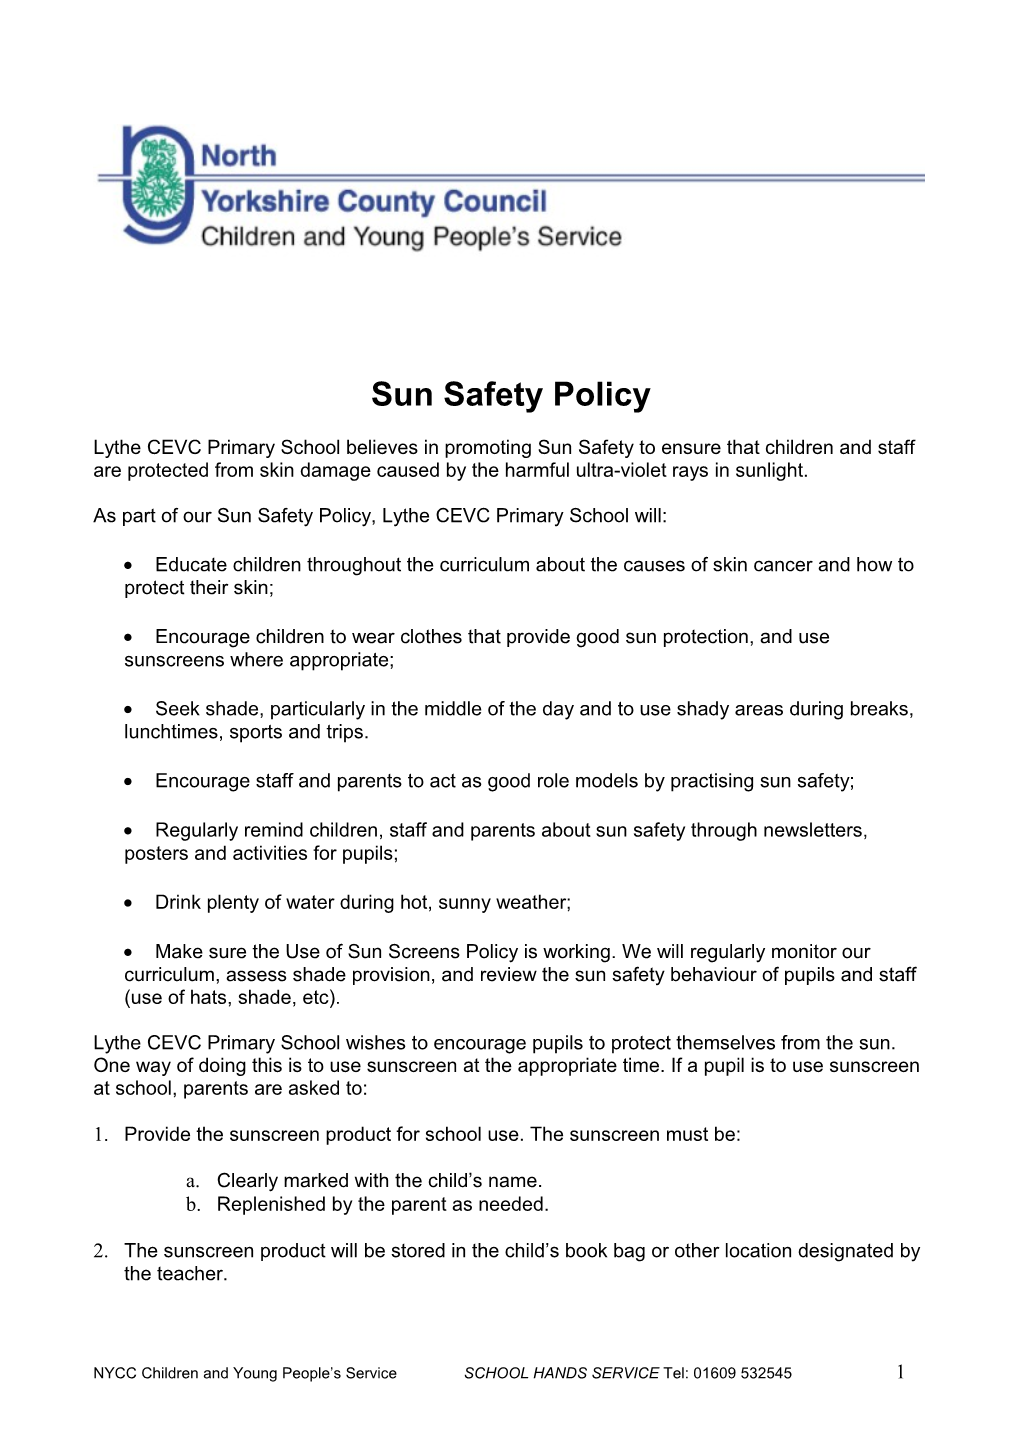 Sun Safety Policy